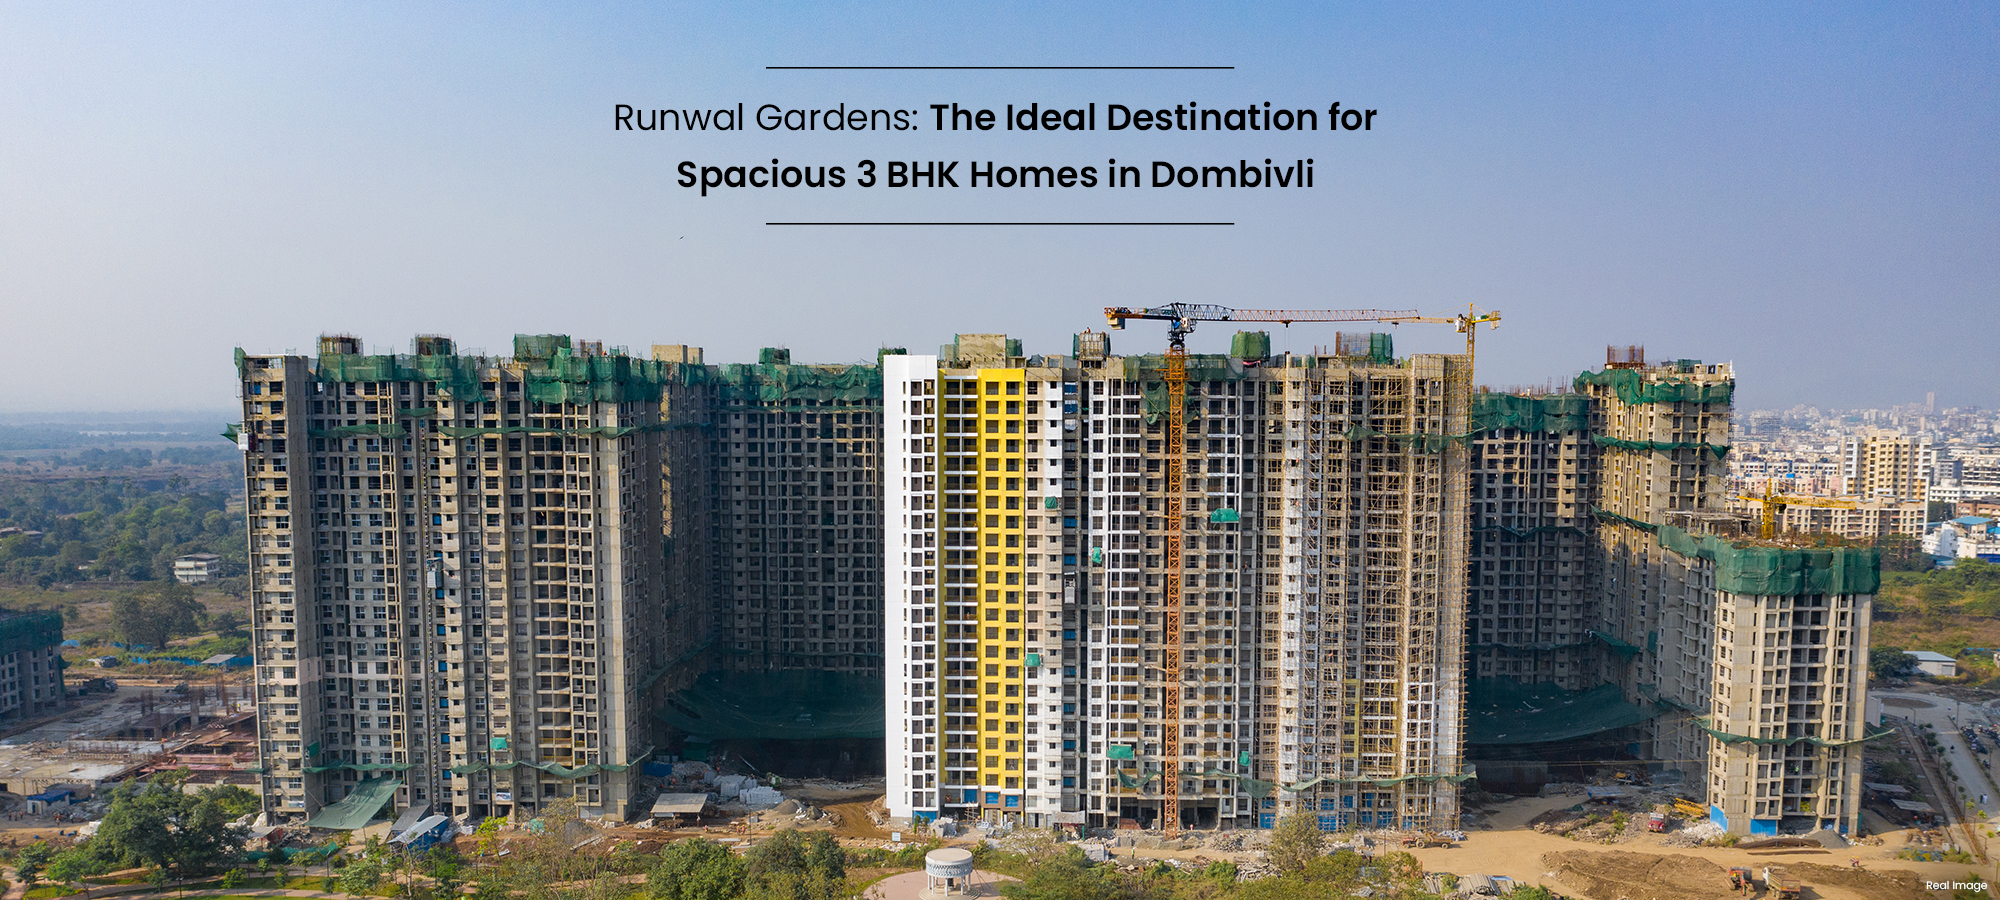 Runwal Gardens - The Ideal Destination for Spacious 3 BHK Homes in Dombivli